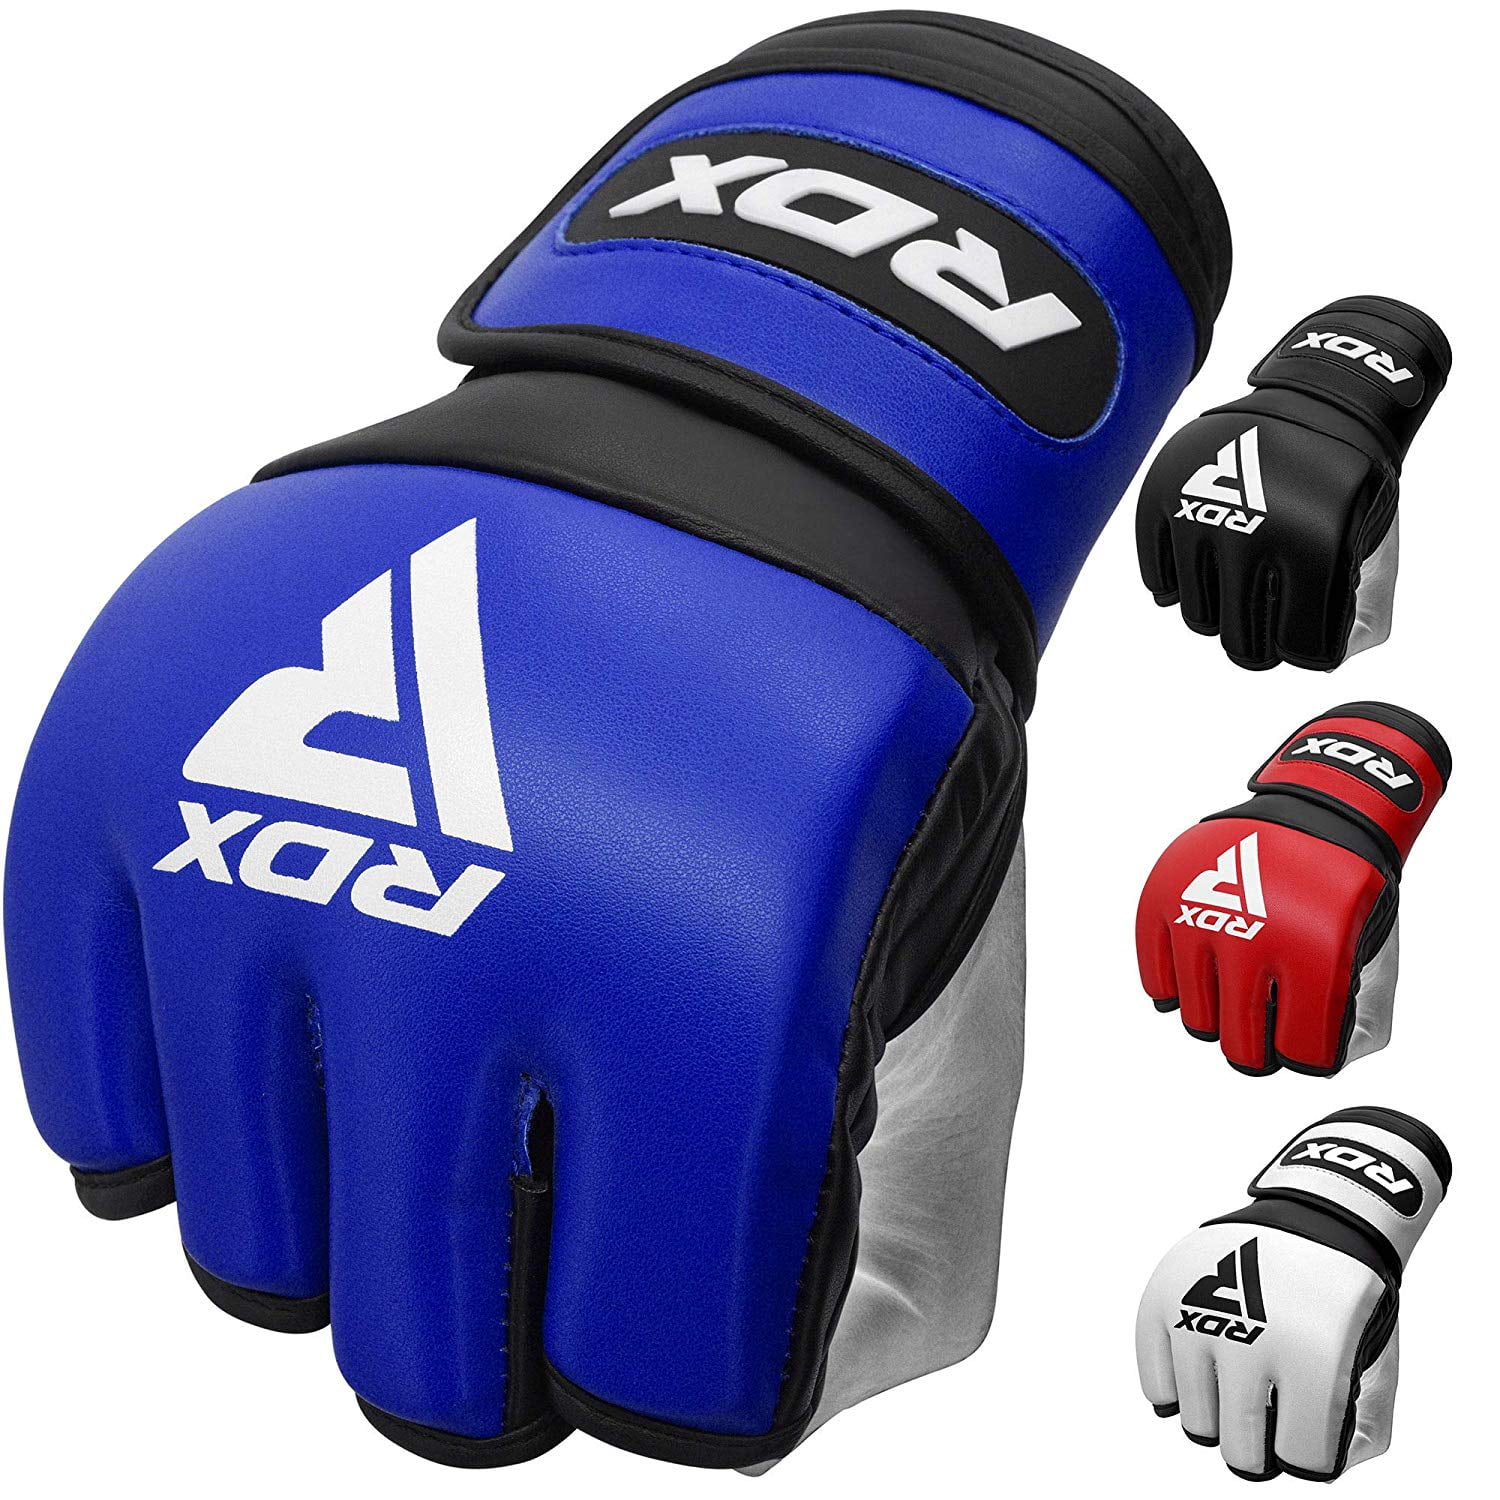 MMA Grappling Boxing Martial Arts Fight Cage Training Muay Thai Sparring Gloves 